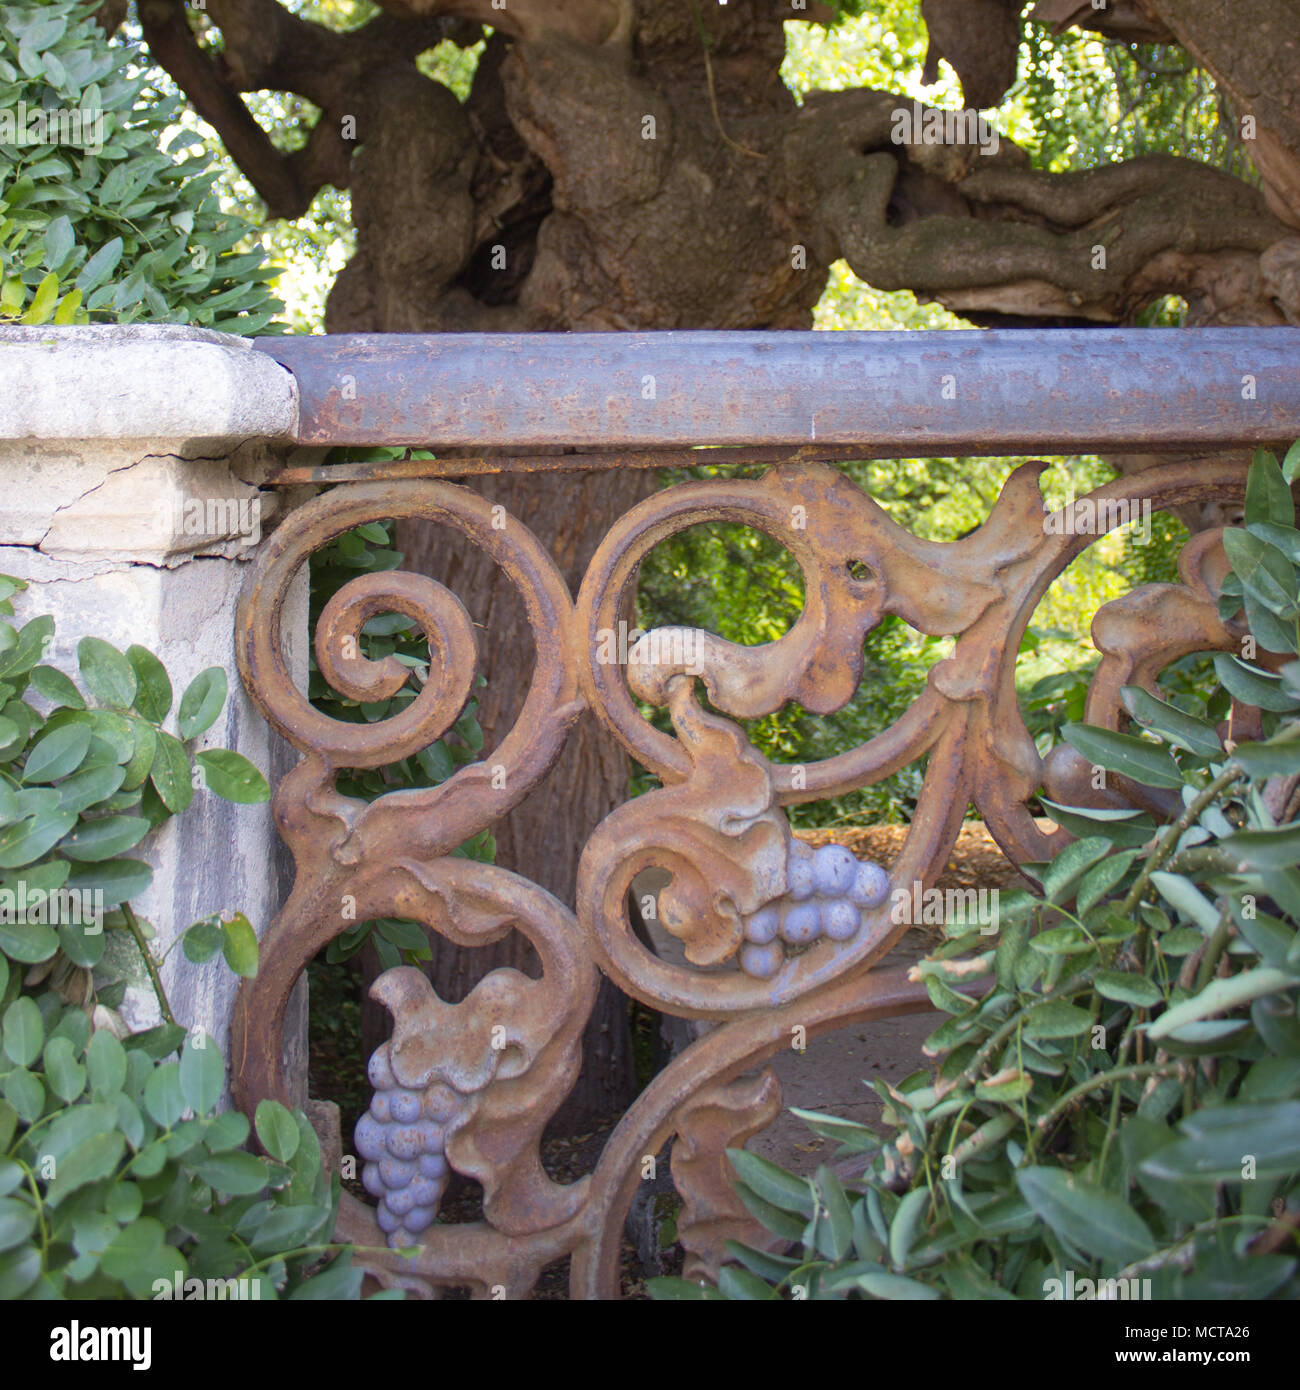 Japanese pagoda tree with old metal rusty railing. Old sophora japonica is in the background. In the foreground is old metal rusty railing with a moti Stock Photo